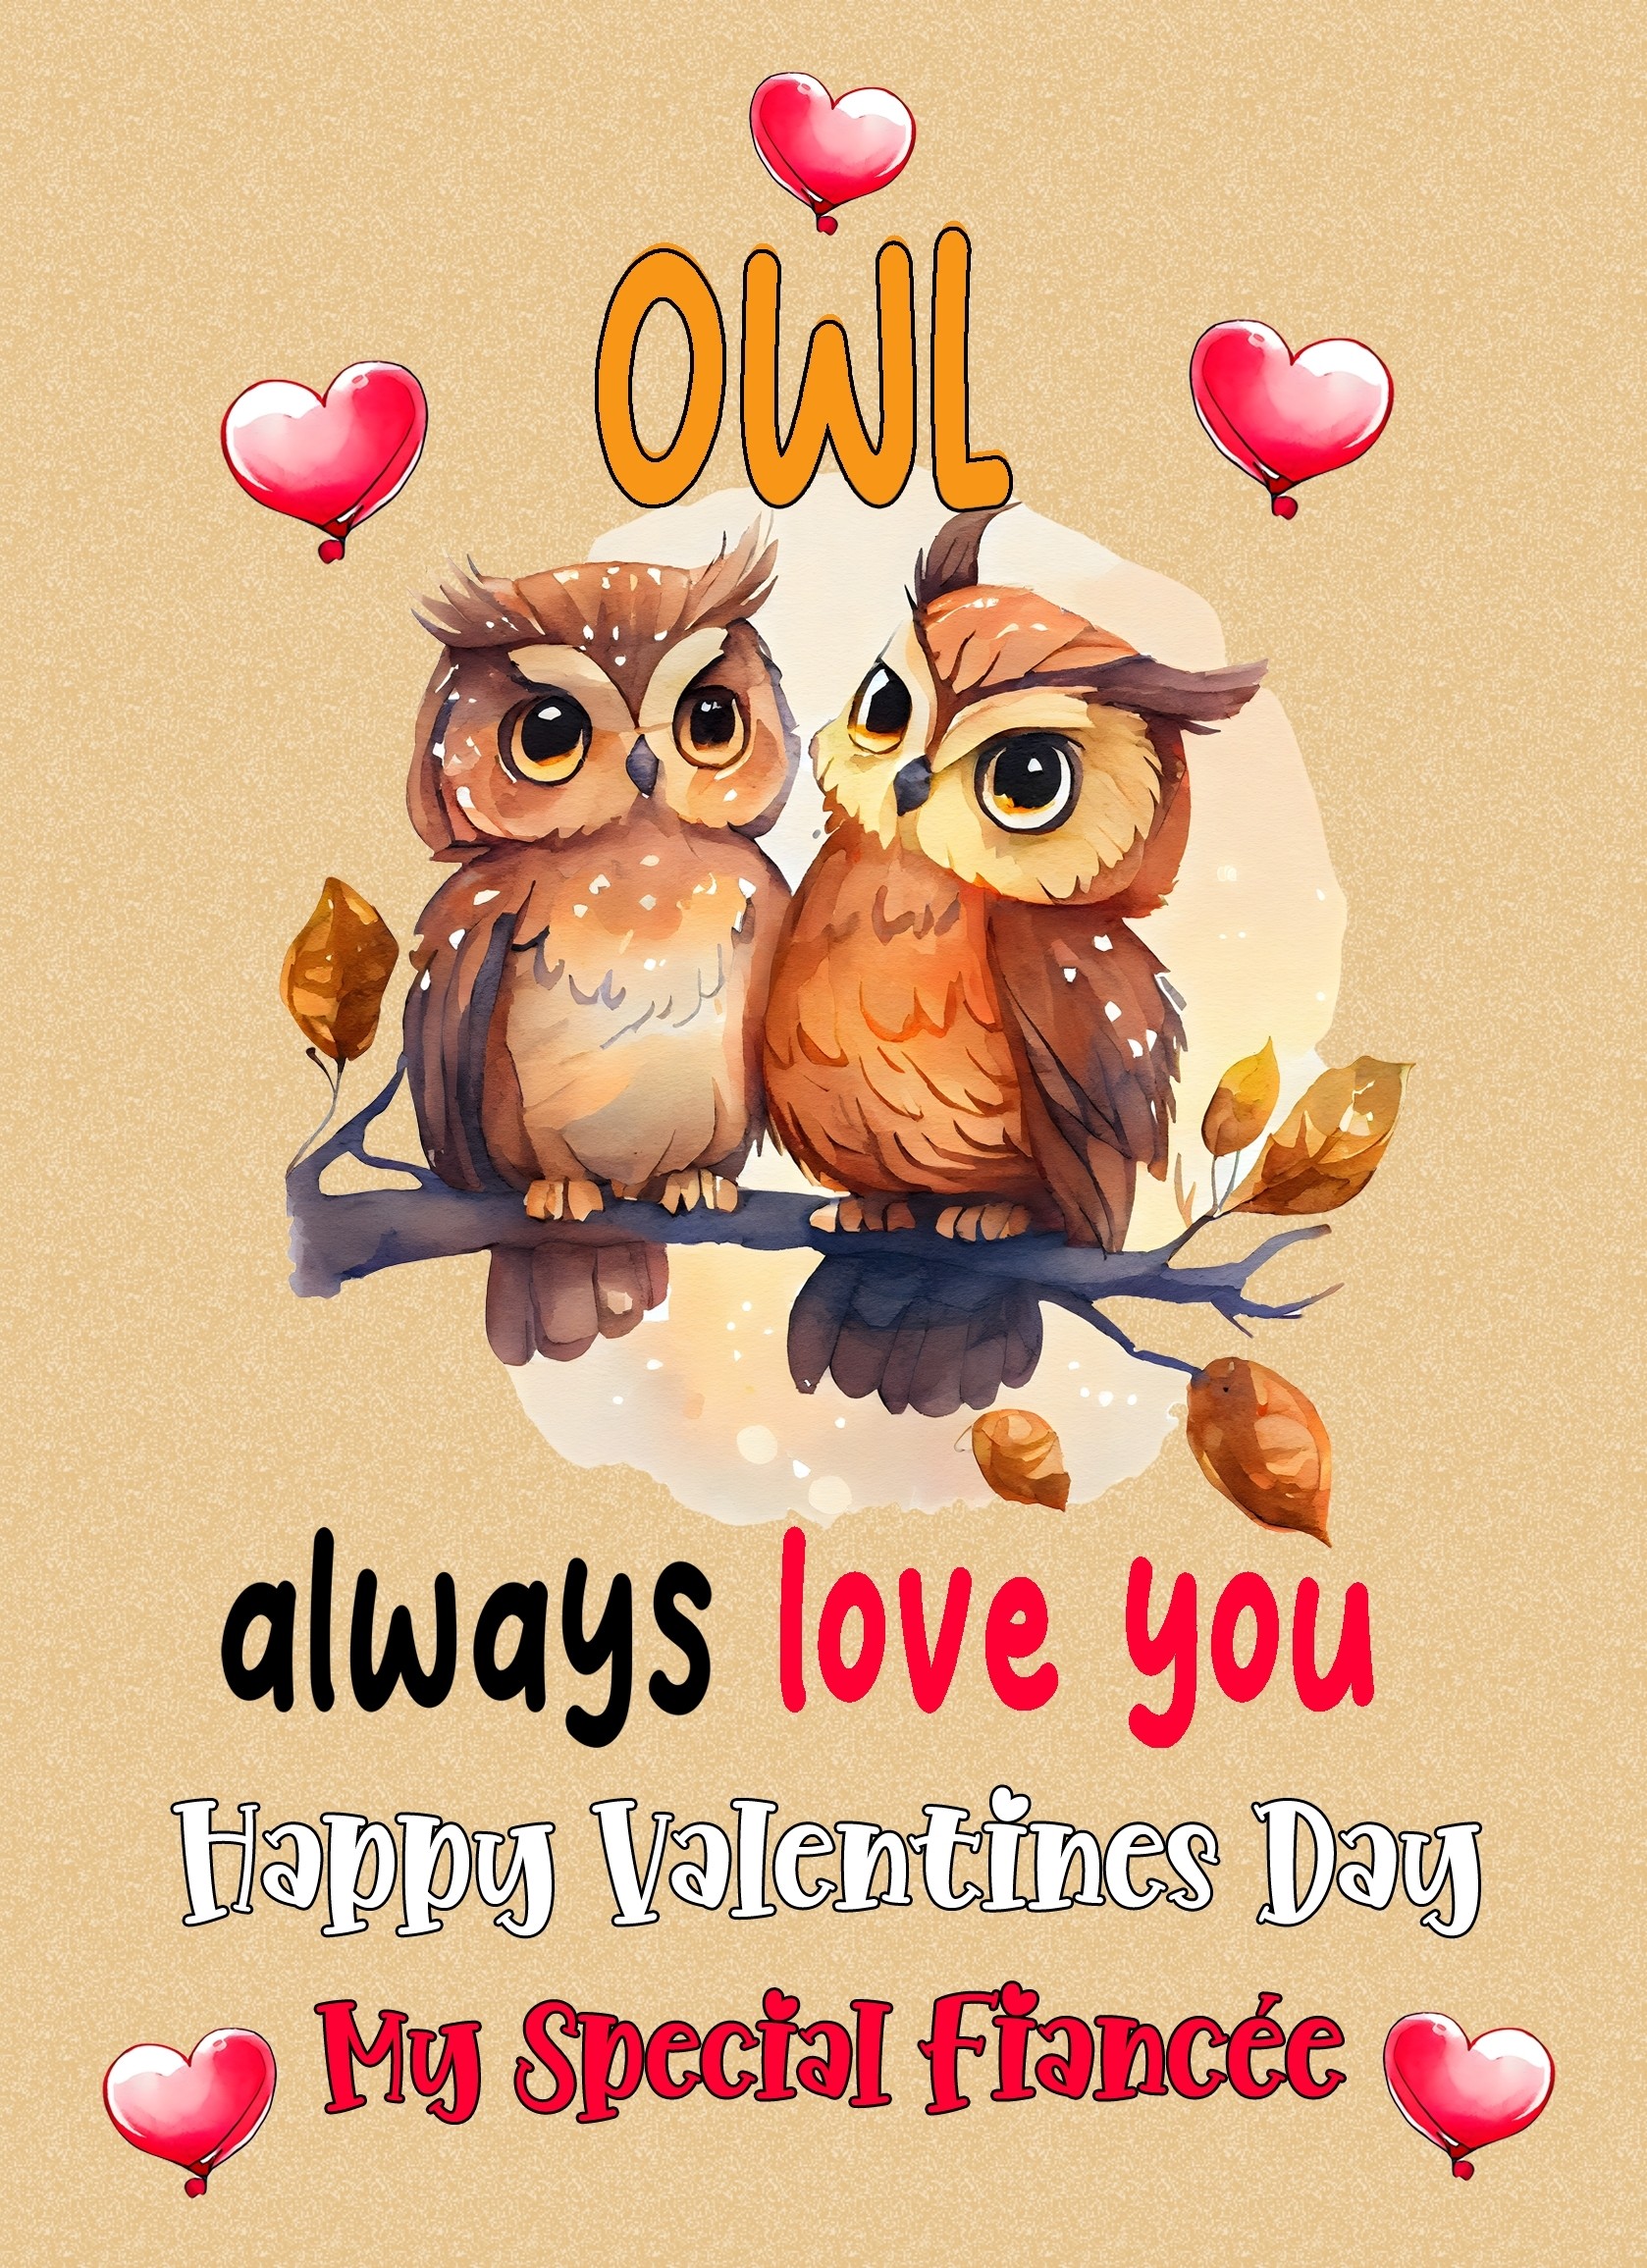 Funny Pun Valentines Day Card for Fiancee (Owl Always Love You)